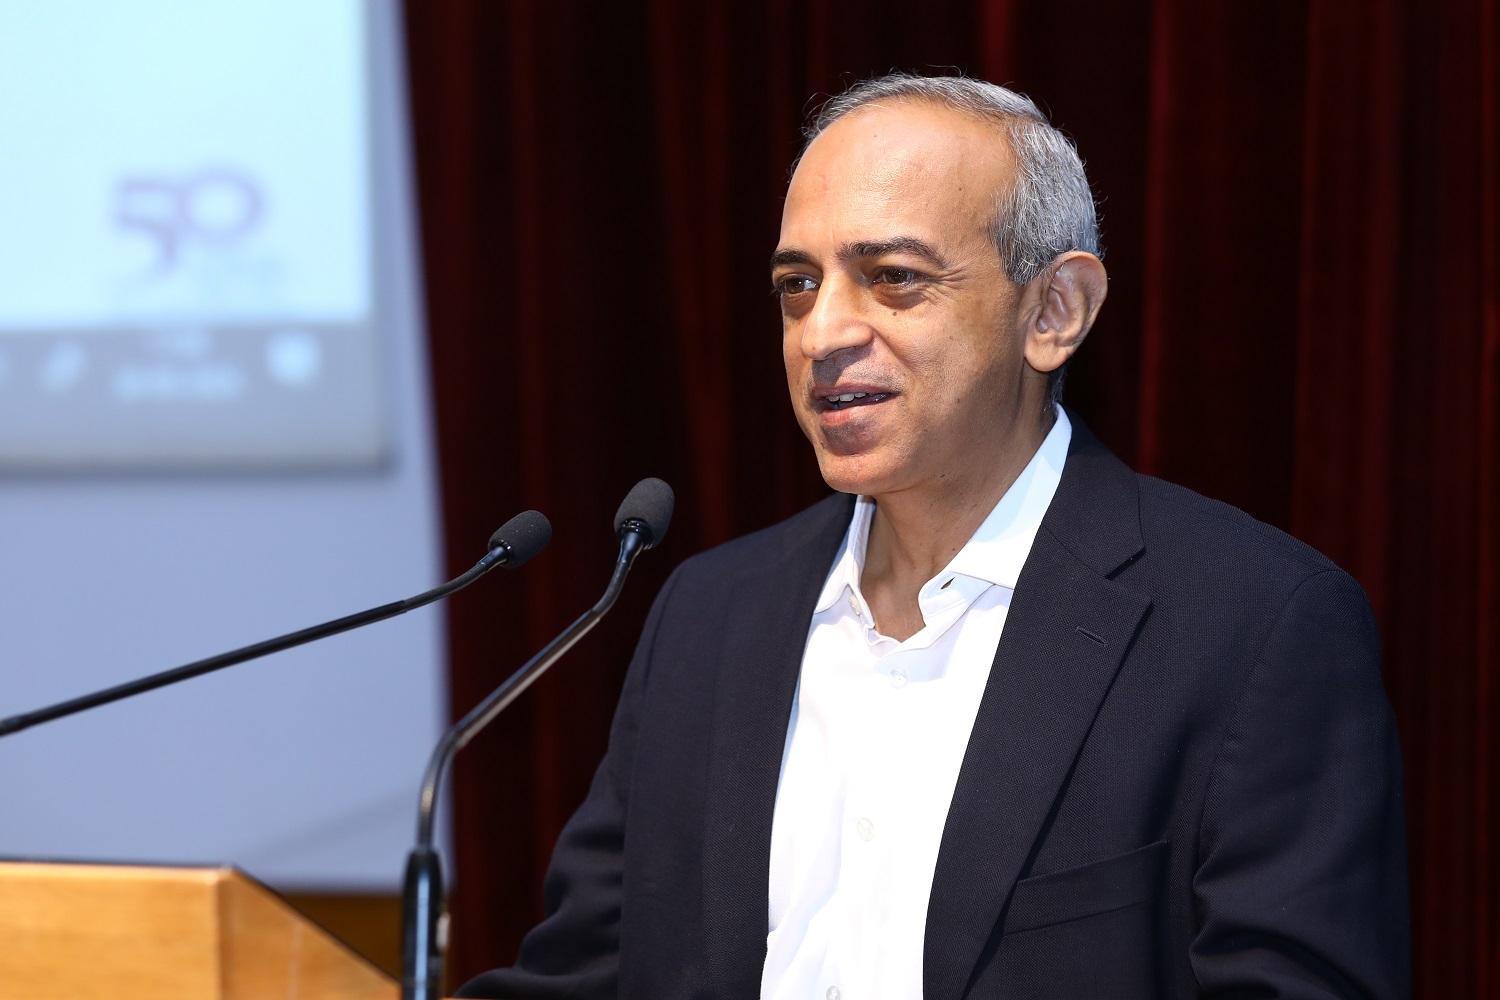 Prof. Ashok Thampy, Chairperson, Executive Post Graduate Programme in Management and faculty in the Finance & Accounting area, IIMB, introduces the Chief Guest while addressing the new EPGP batch. 